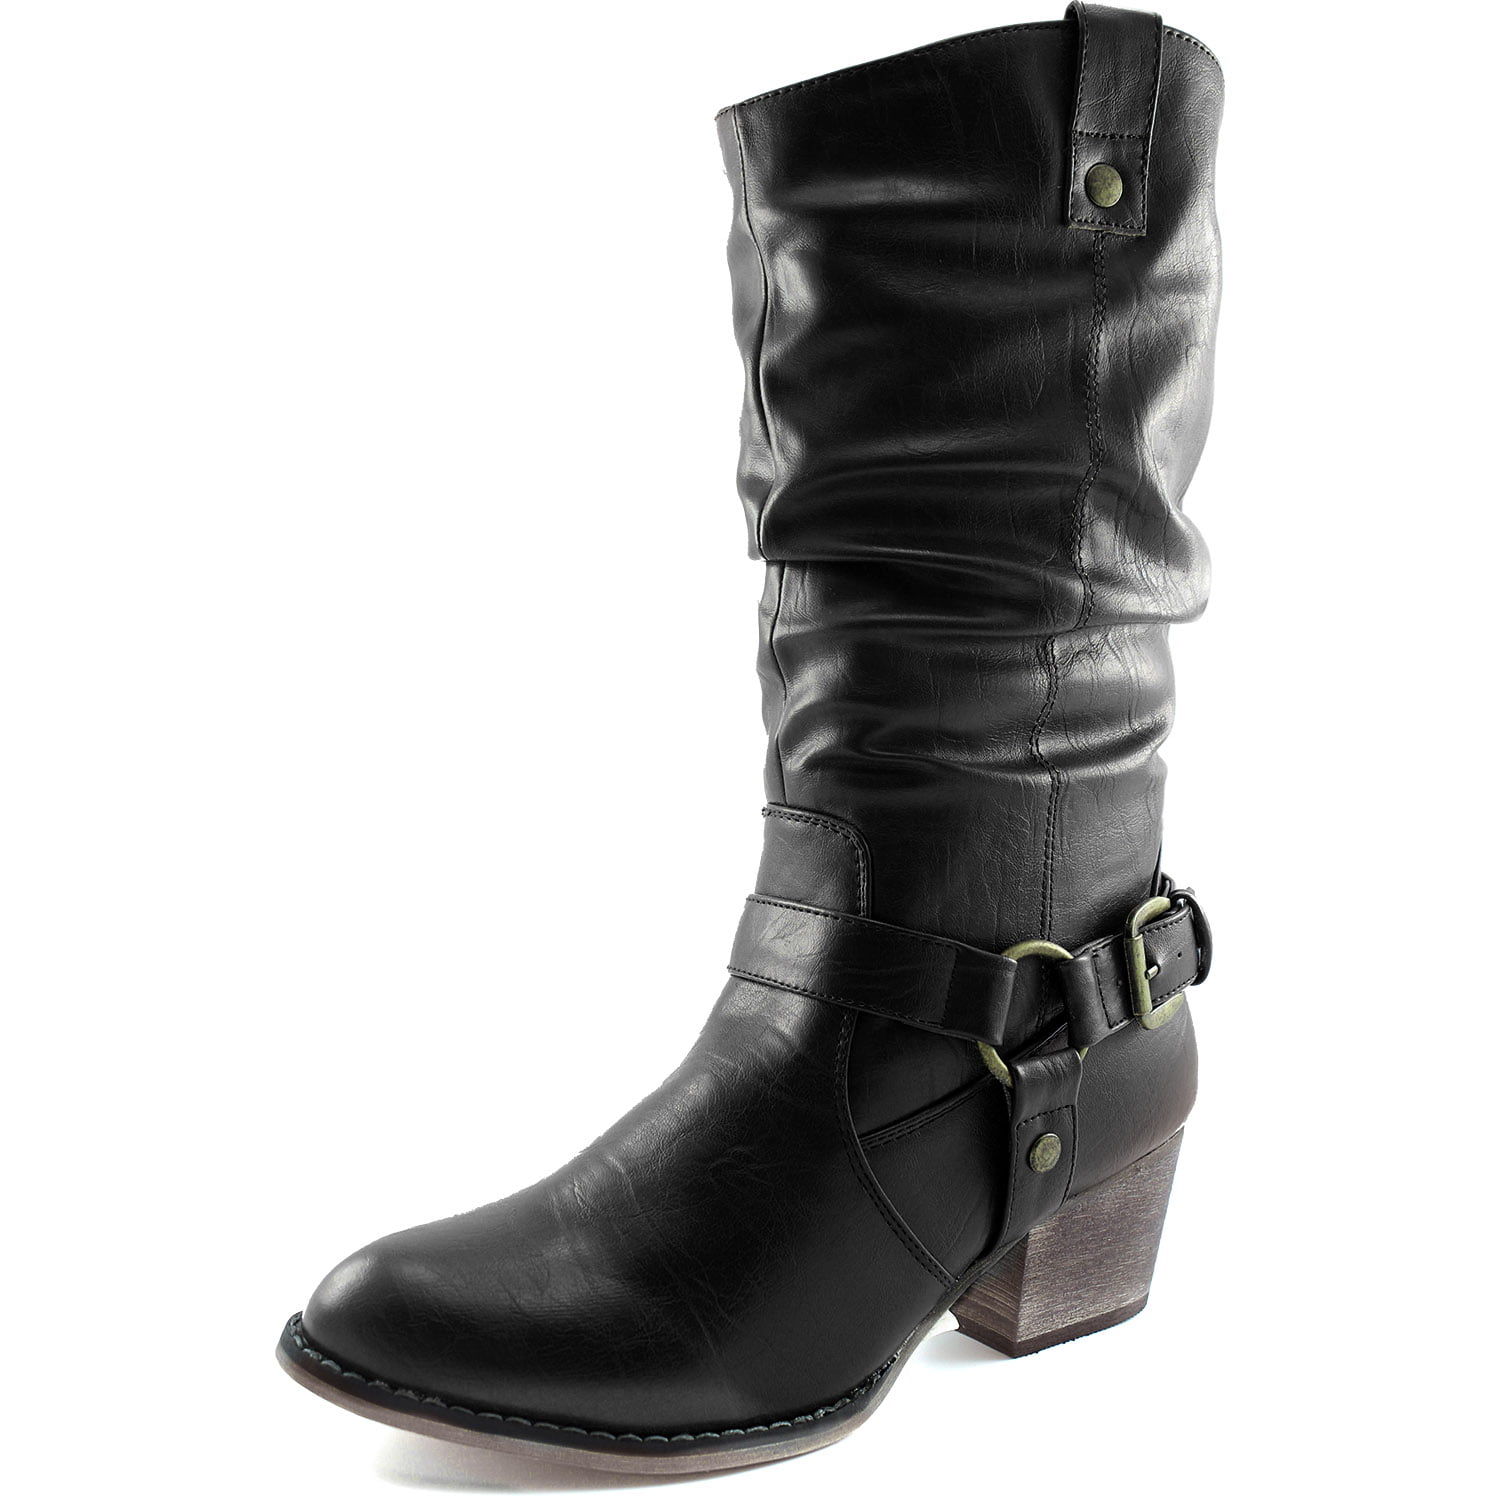 Women's Mid Kitten Heel Slouch Knee High Boots Riding Motorcycle Mid Calf Boots